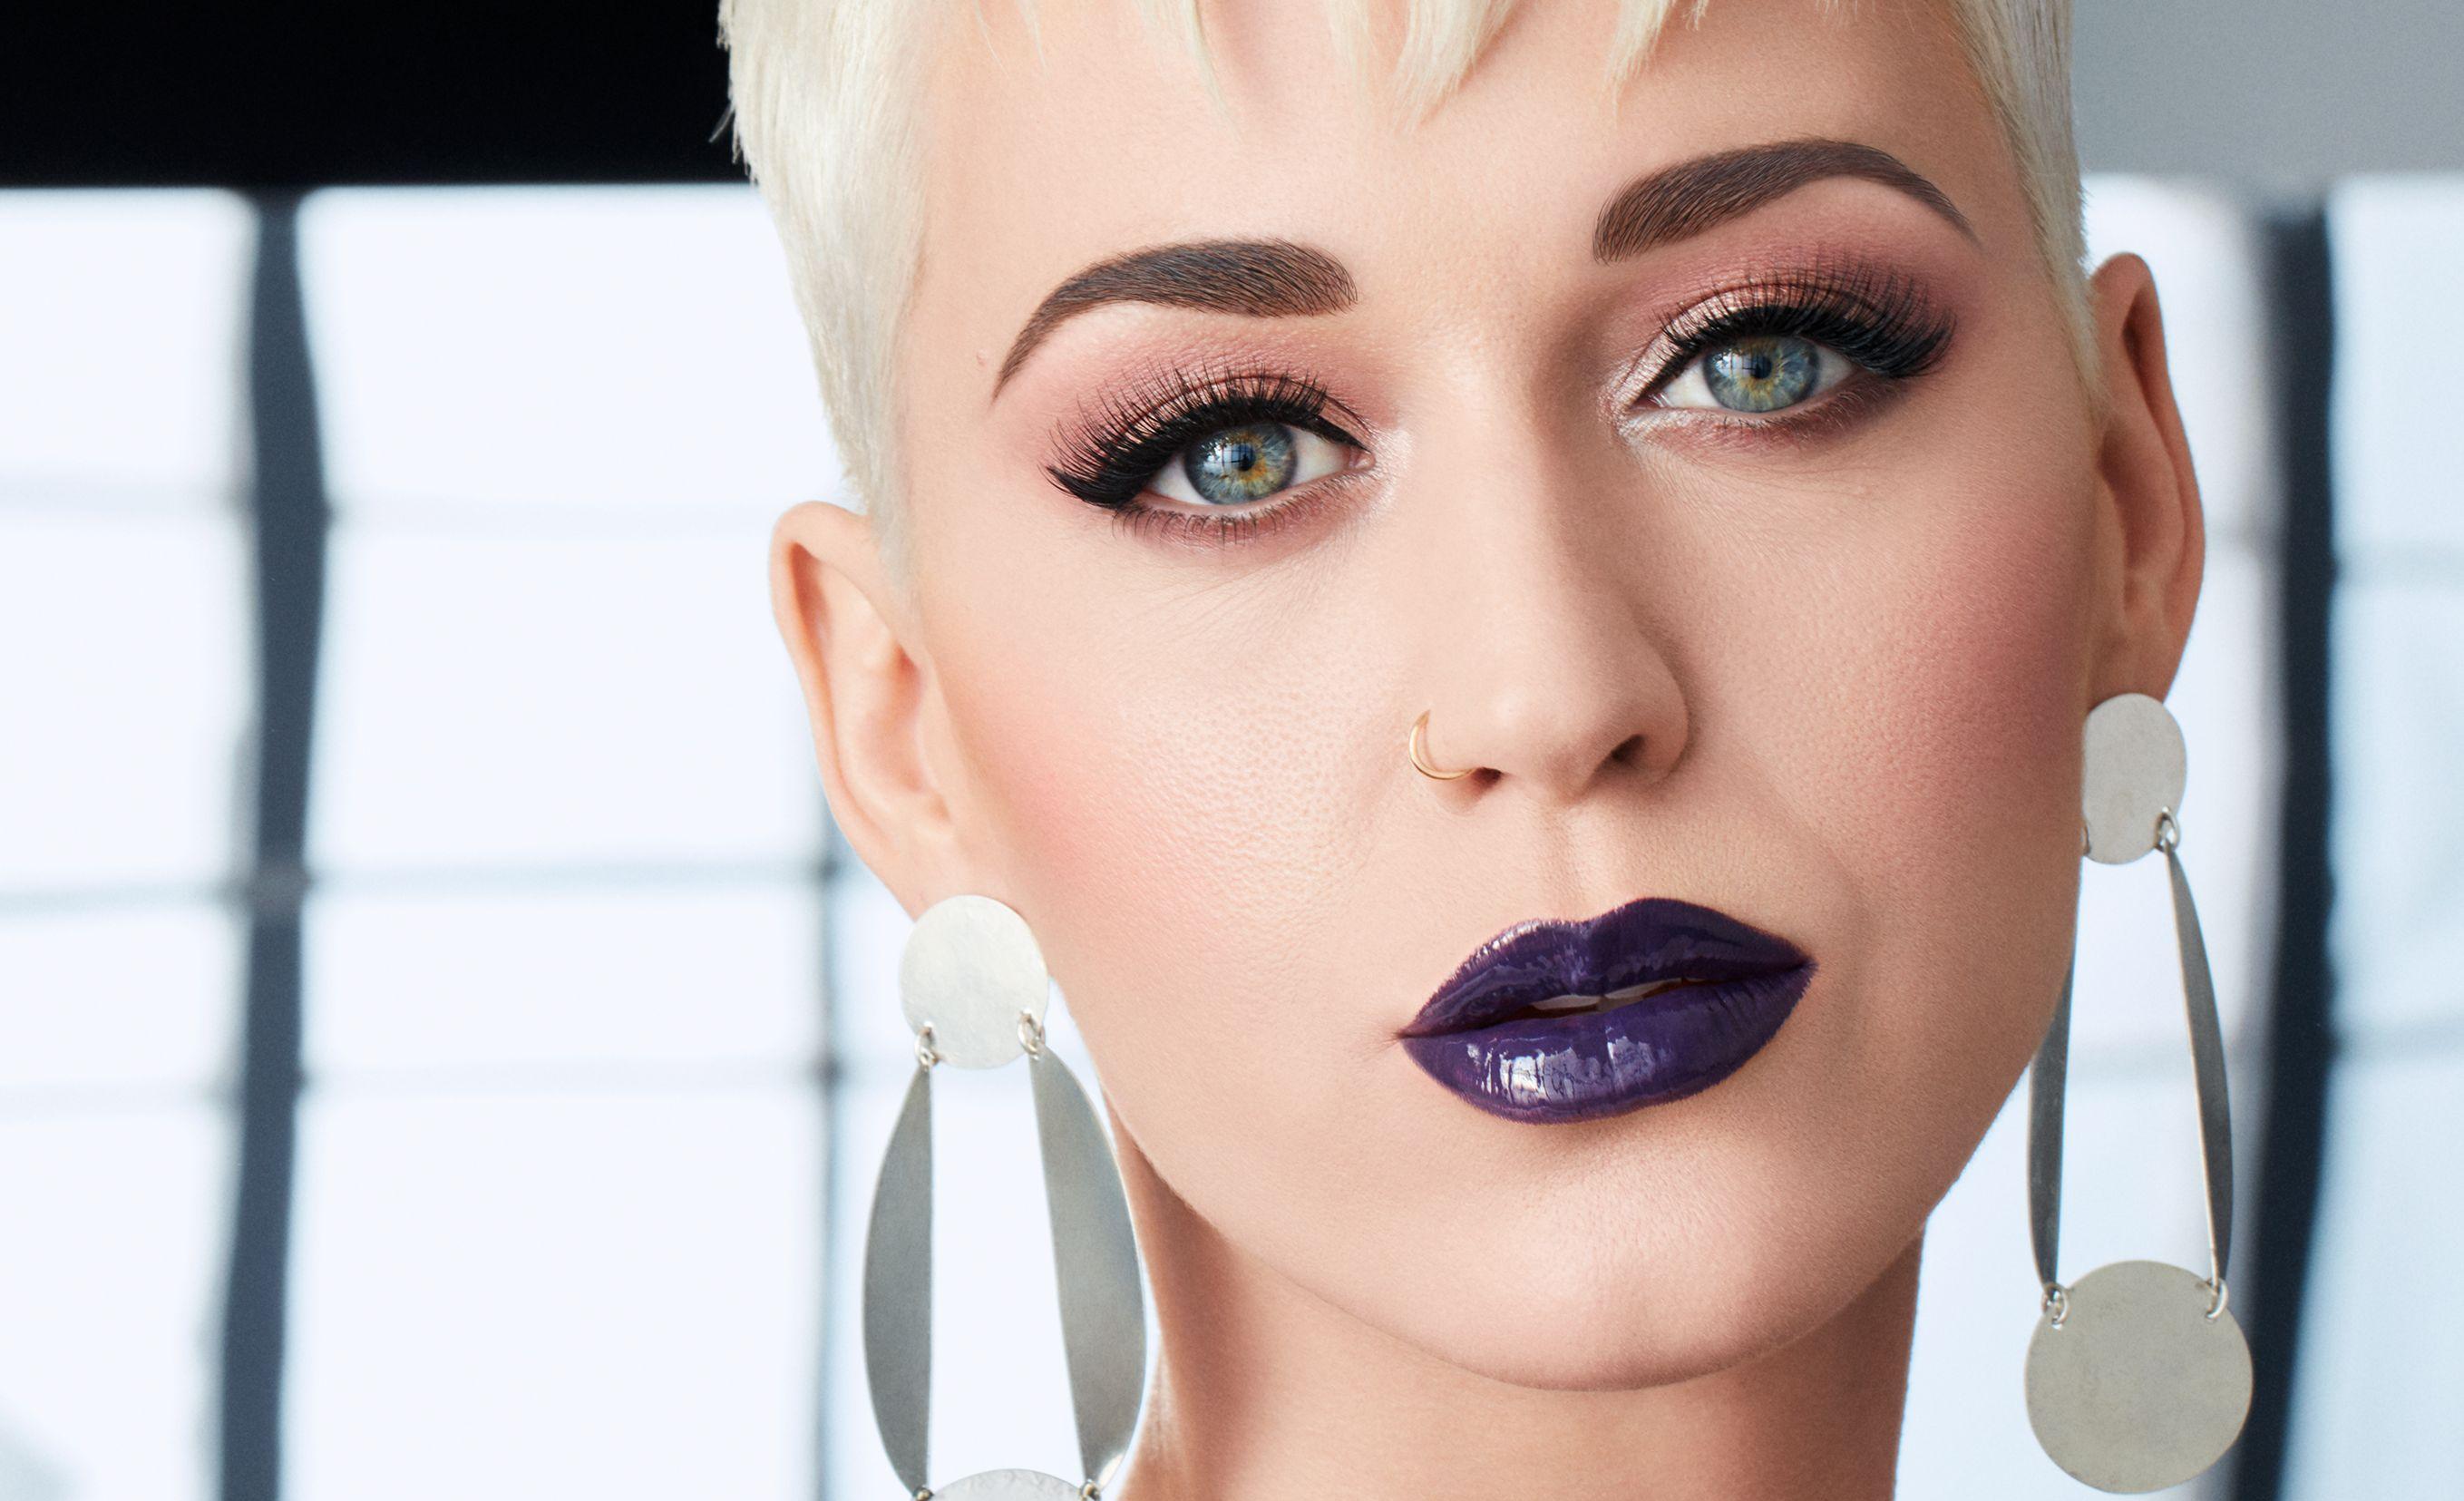 Katy Perry Cover Girl HD Celebrities, 4k Wallpaper, Image